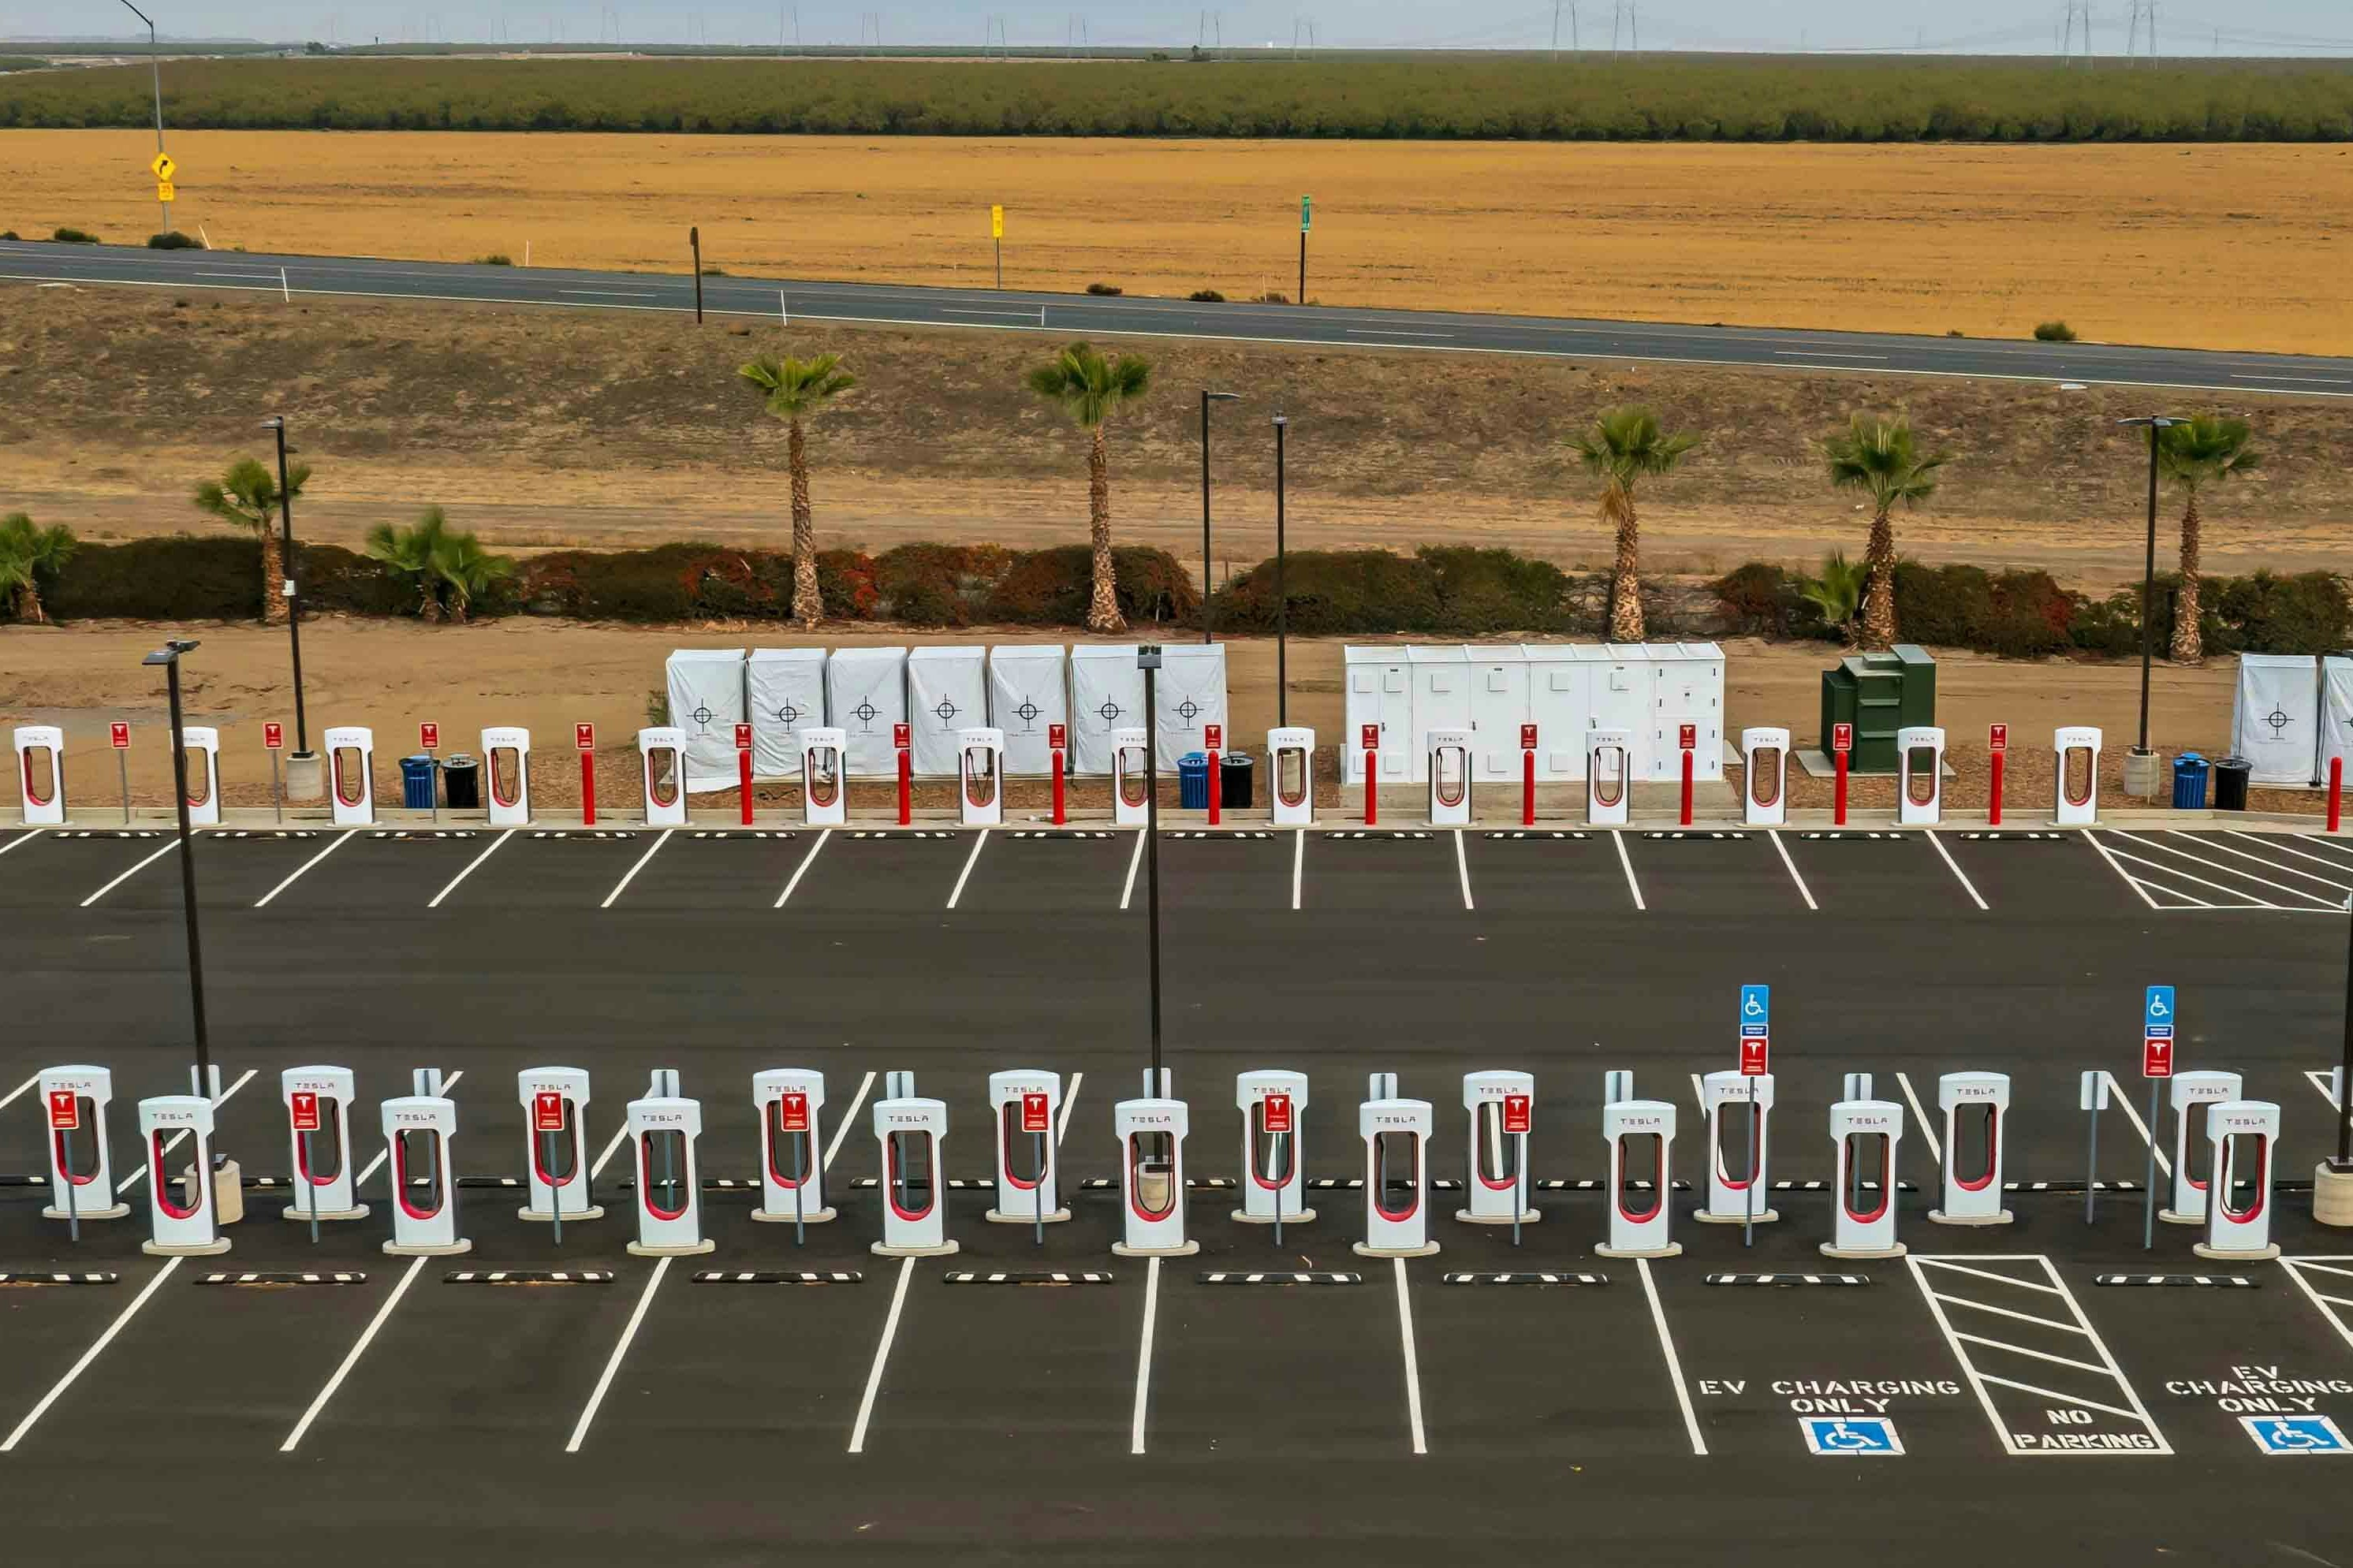 Aerial photo of supercharger Tesla station at the Harris Ranch in California.